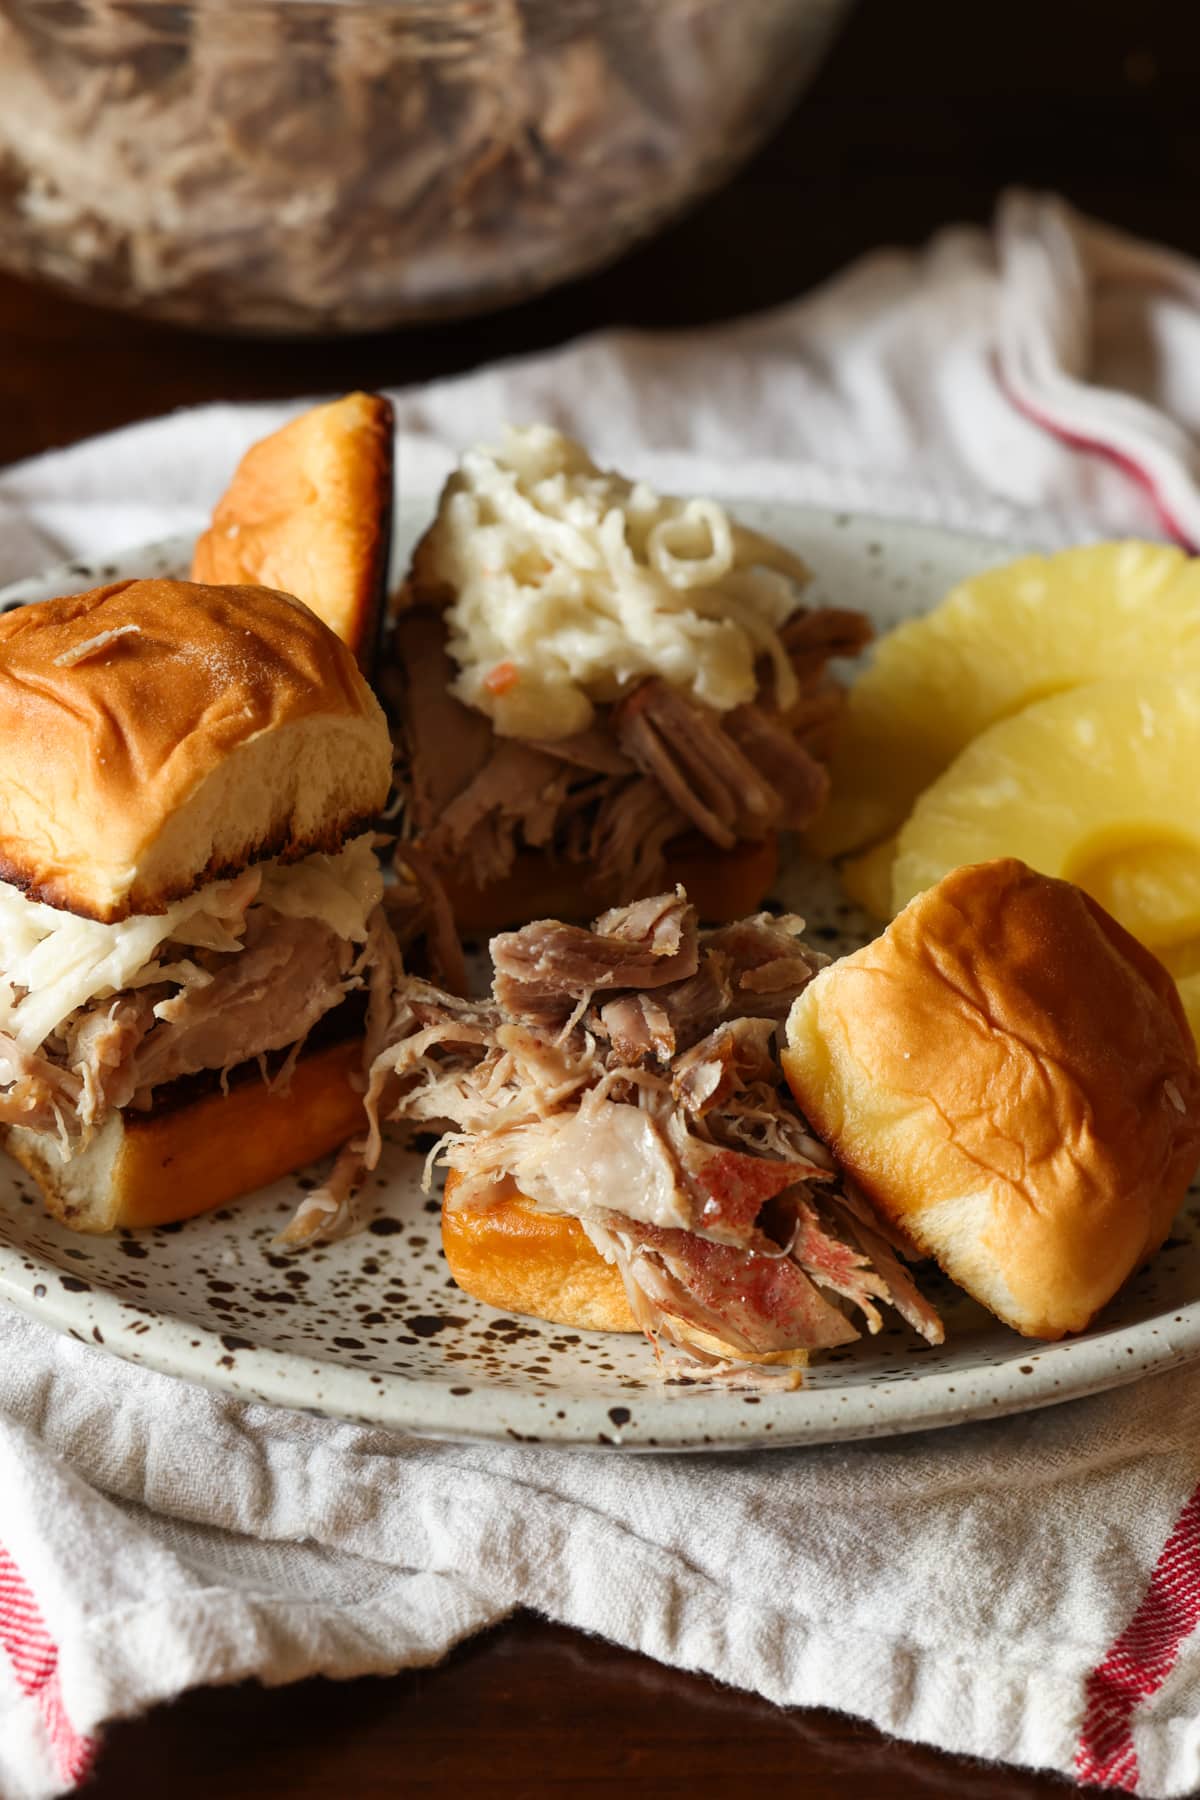 Pulled pork on a Hawaiian roll on a plate with pineapple slices